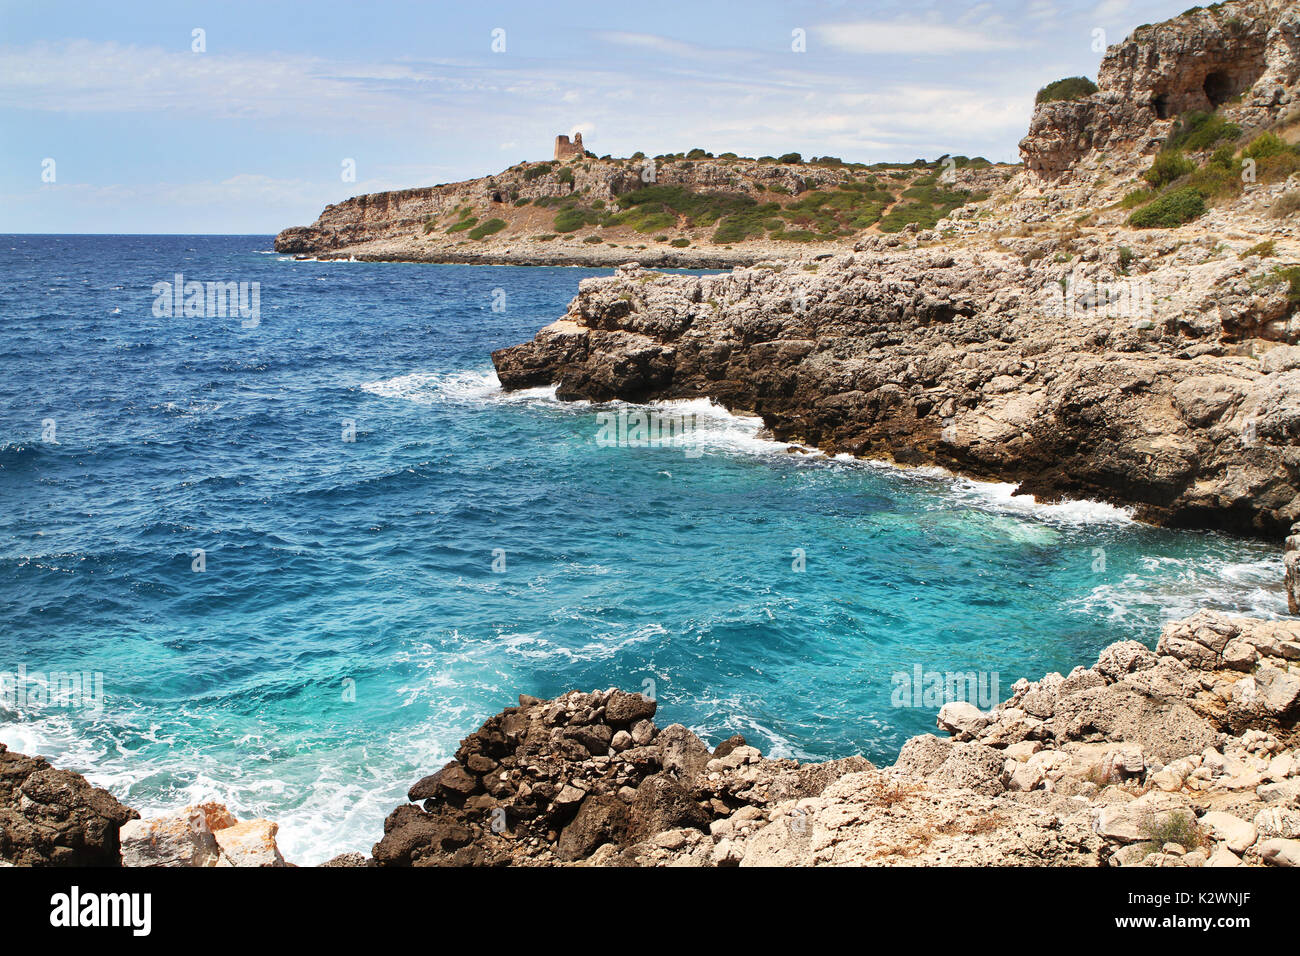 Porto Selvaggio means 'Wild Harbour ' is a wild place of sea, rocks,it's  part of a regional nature reserve in the Salento Region of Apulia  in Italy Stock Photo